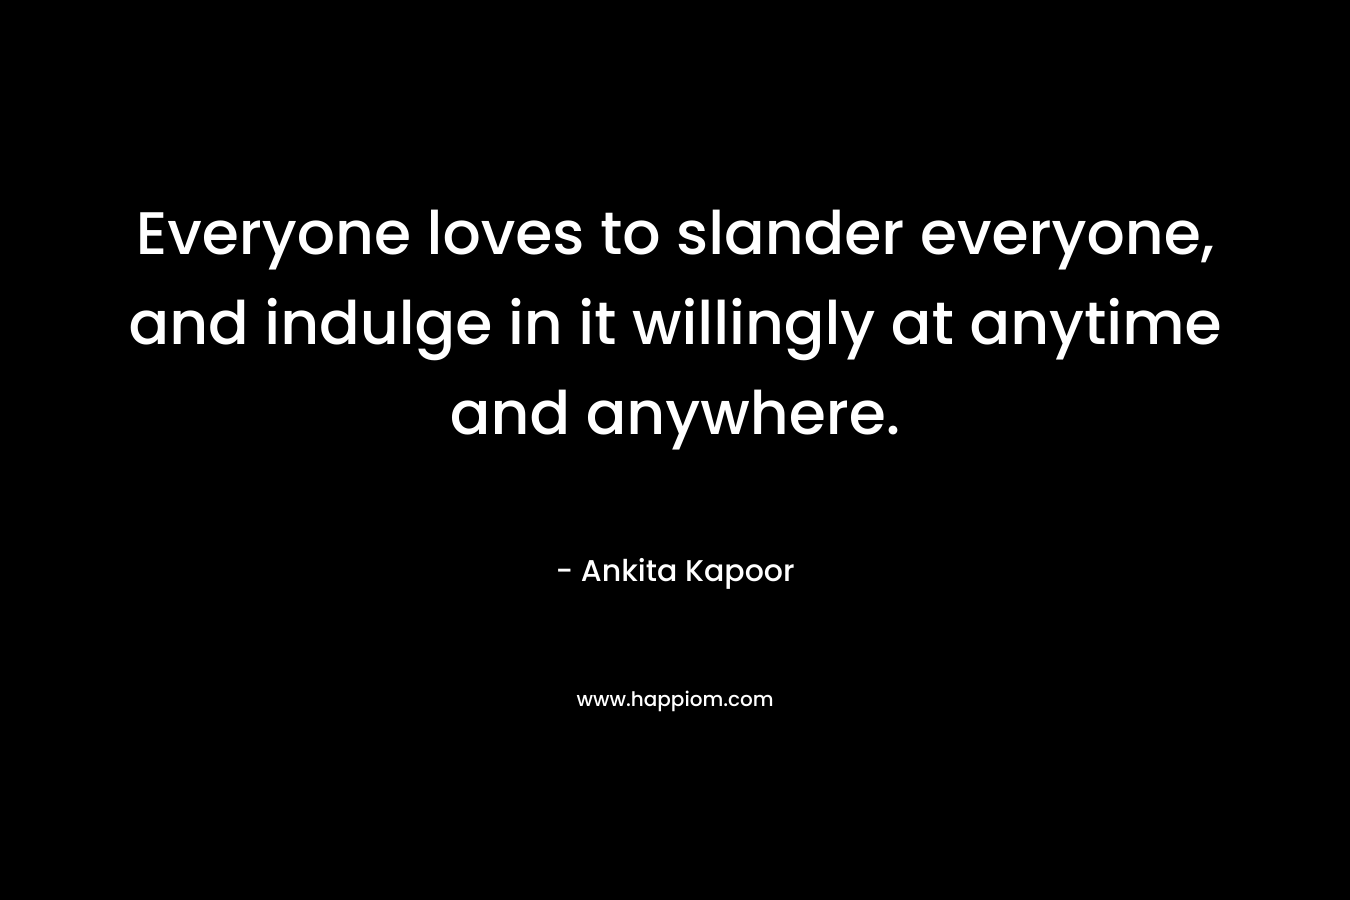 Everyone loves to slander everyone, and indulge in it willingly at anytime and anywhere. – Ankita Kapoor